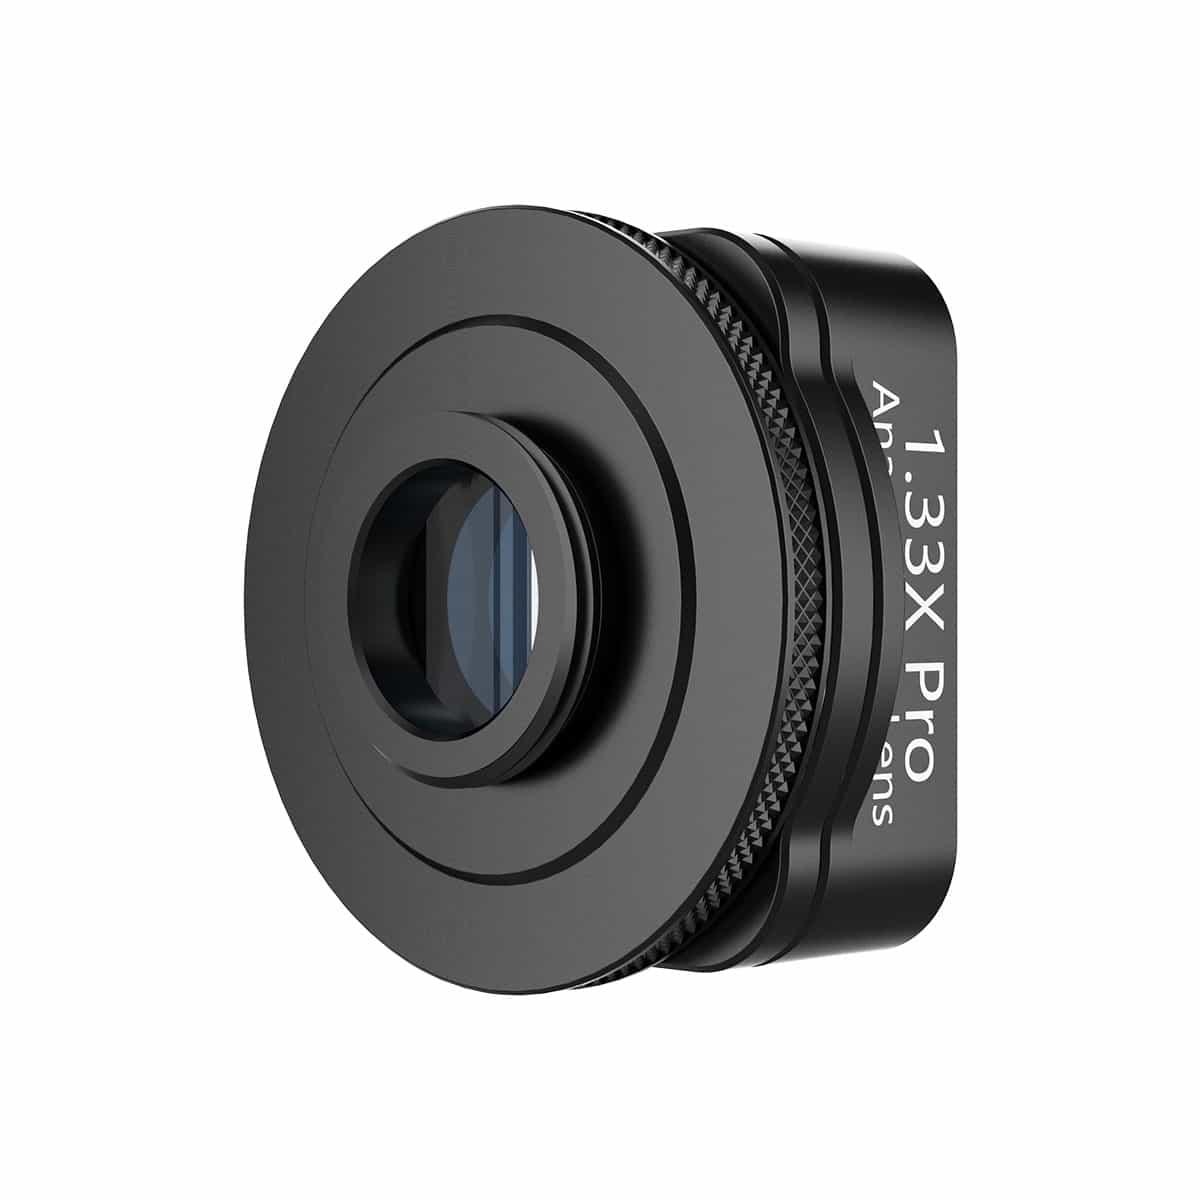 Ulanzi 1.33X Pro Anamorphic Lens (3rd generation) - Universal for all Smartphones